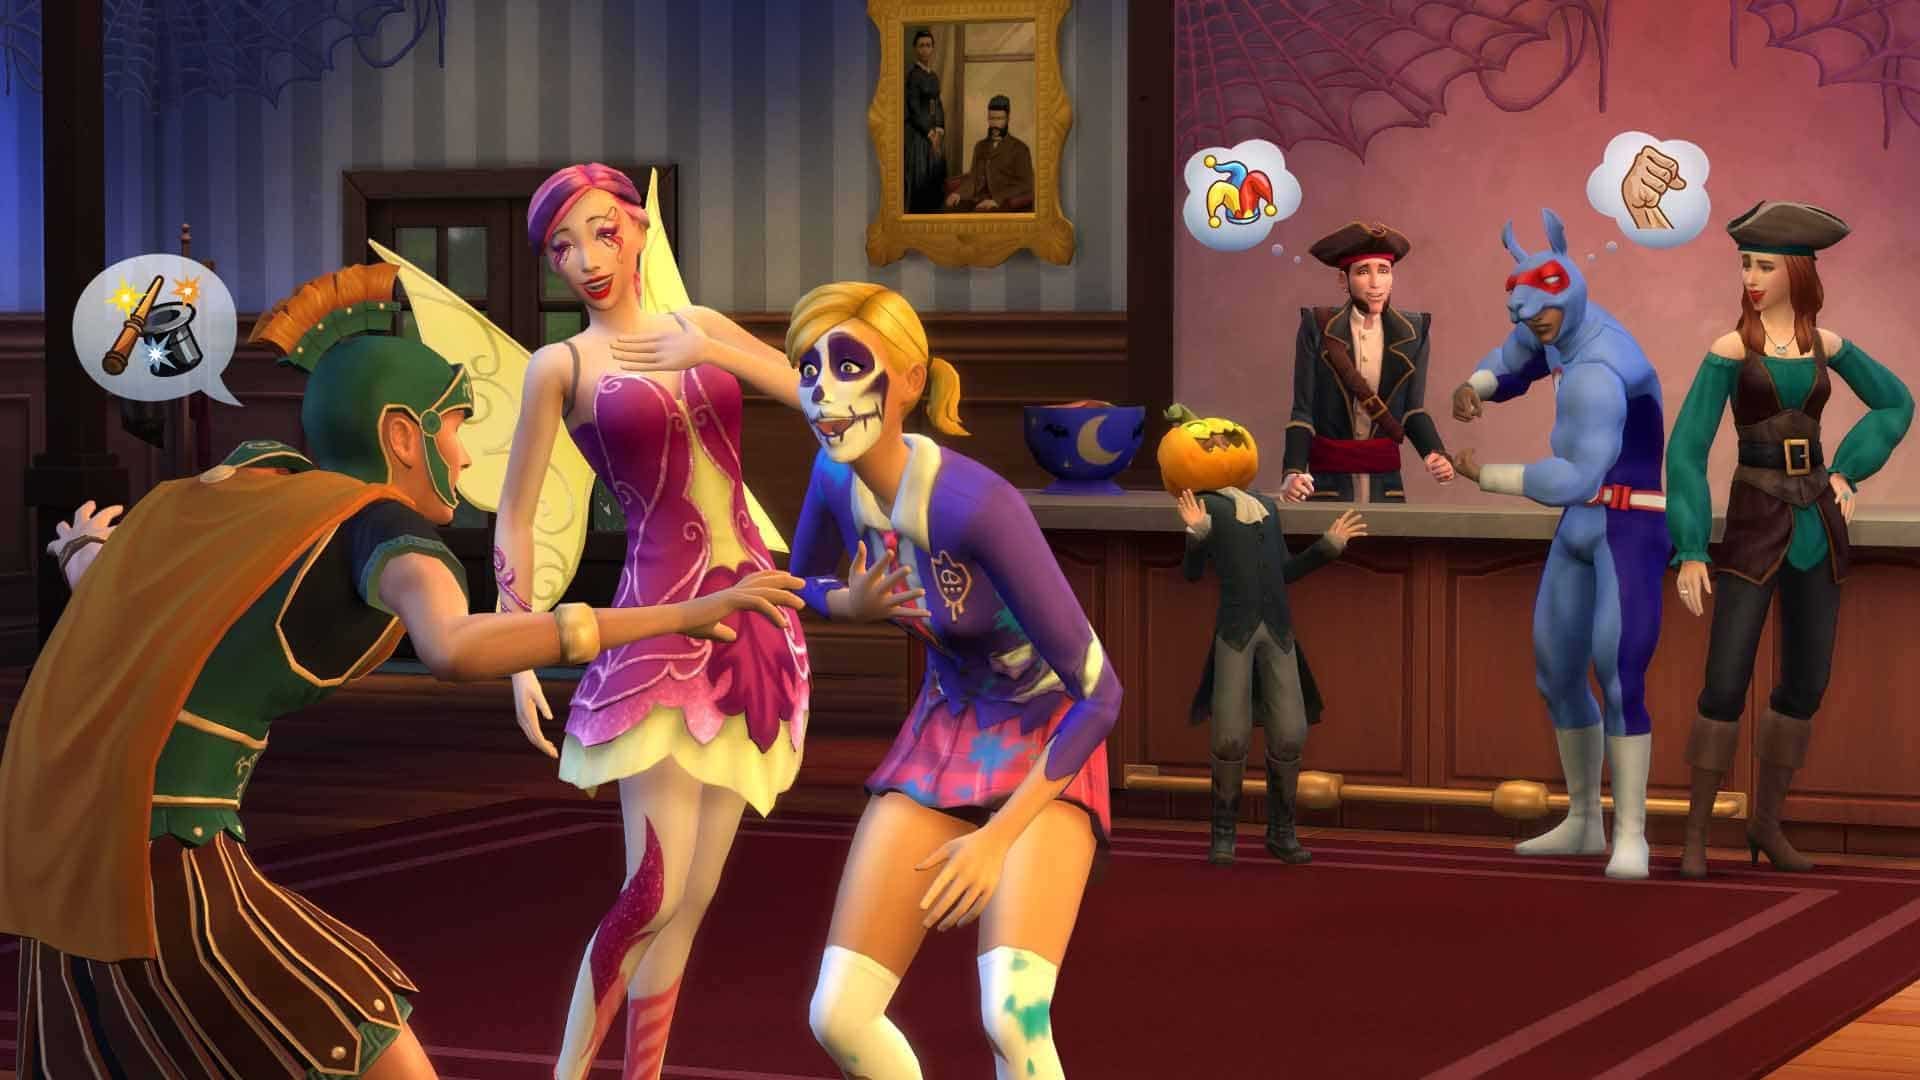 Sims 4, PDF, Cheating In Video Games